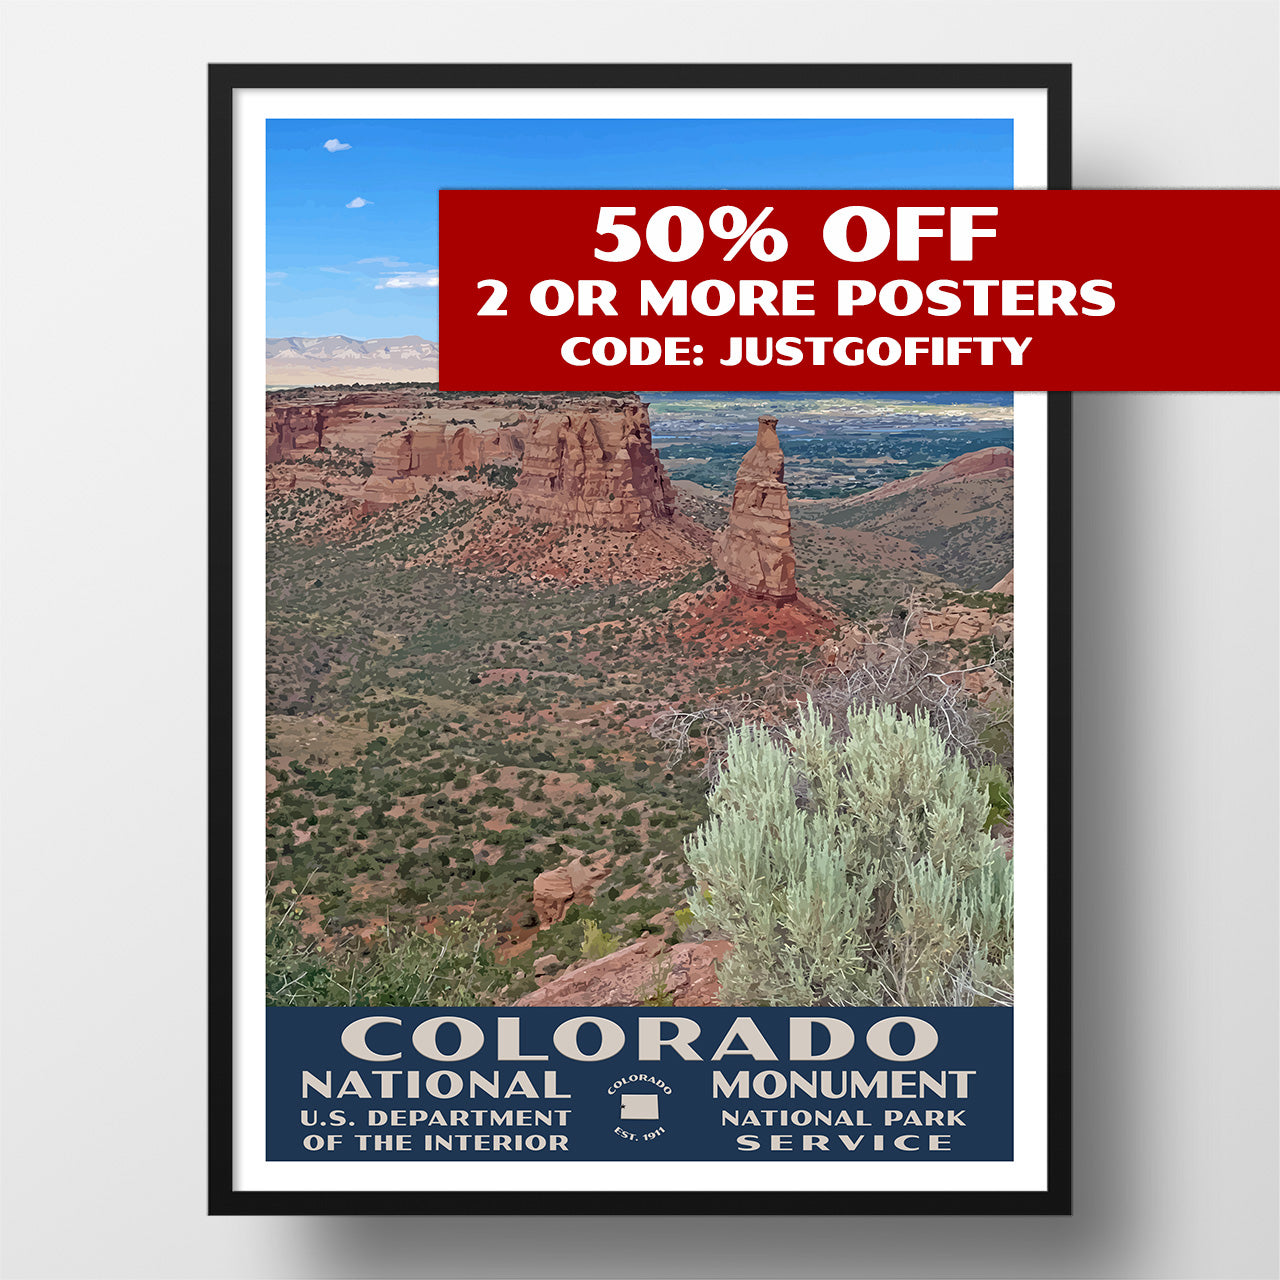 Colorado National Monument Poster-WPA (Independence Monument)